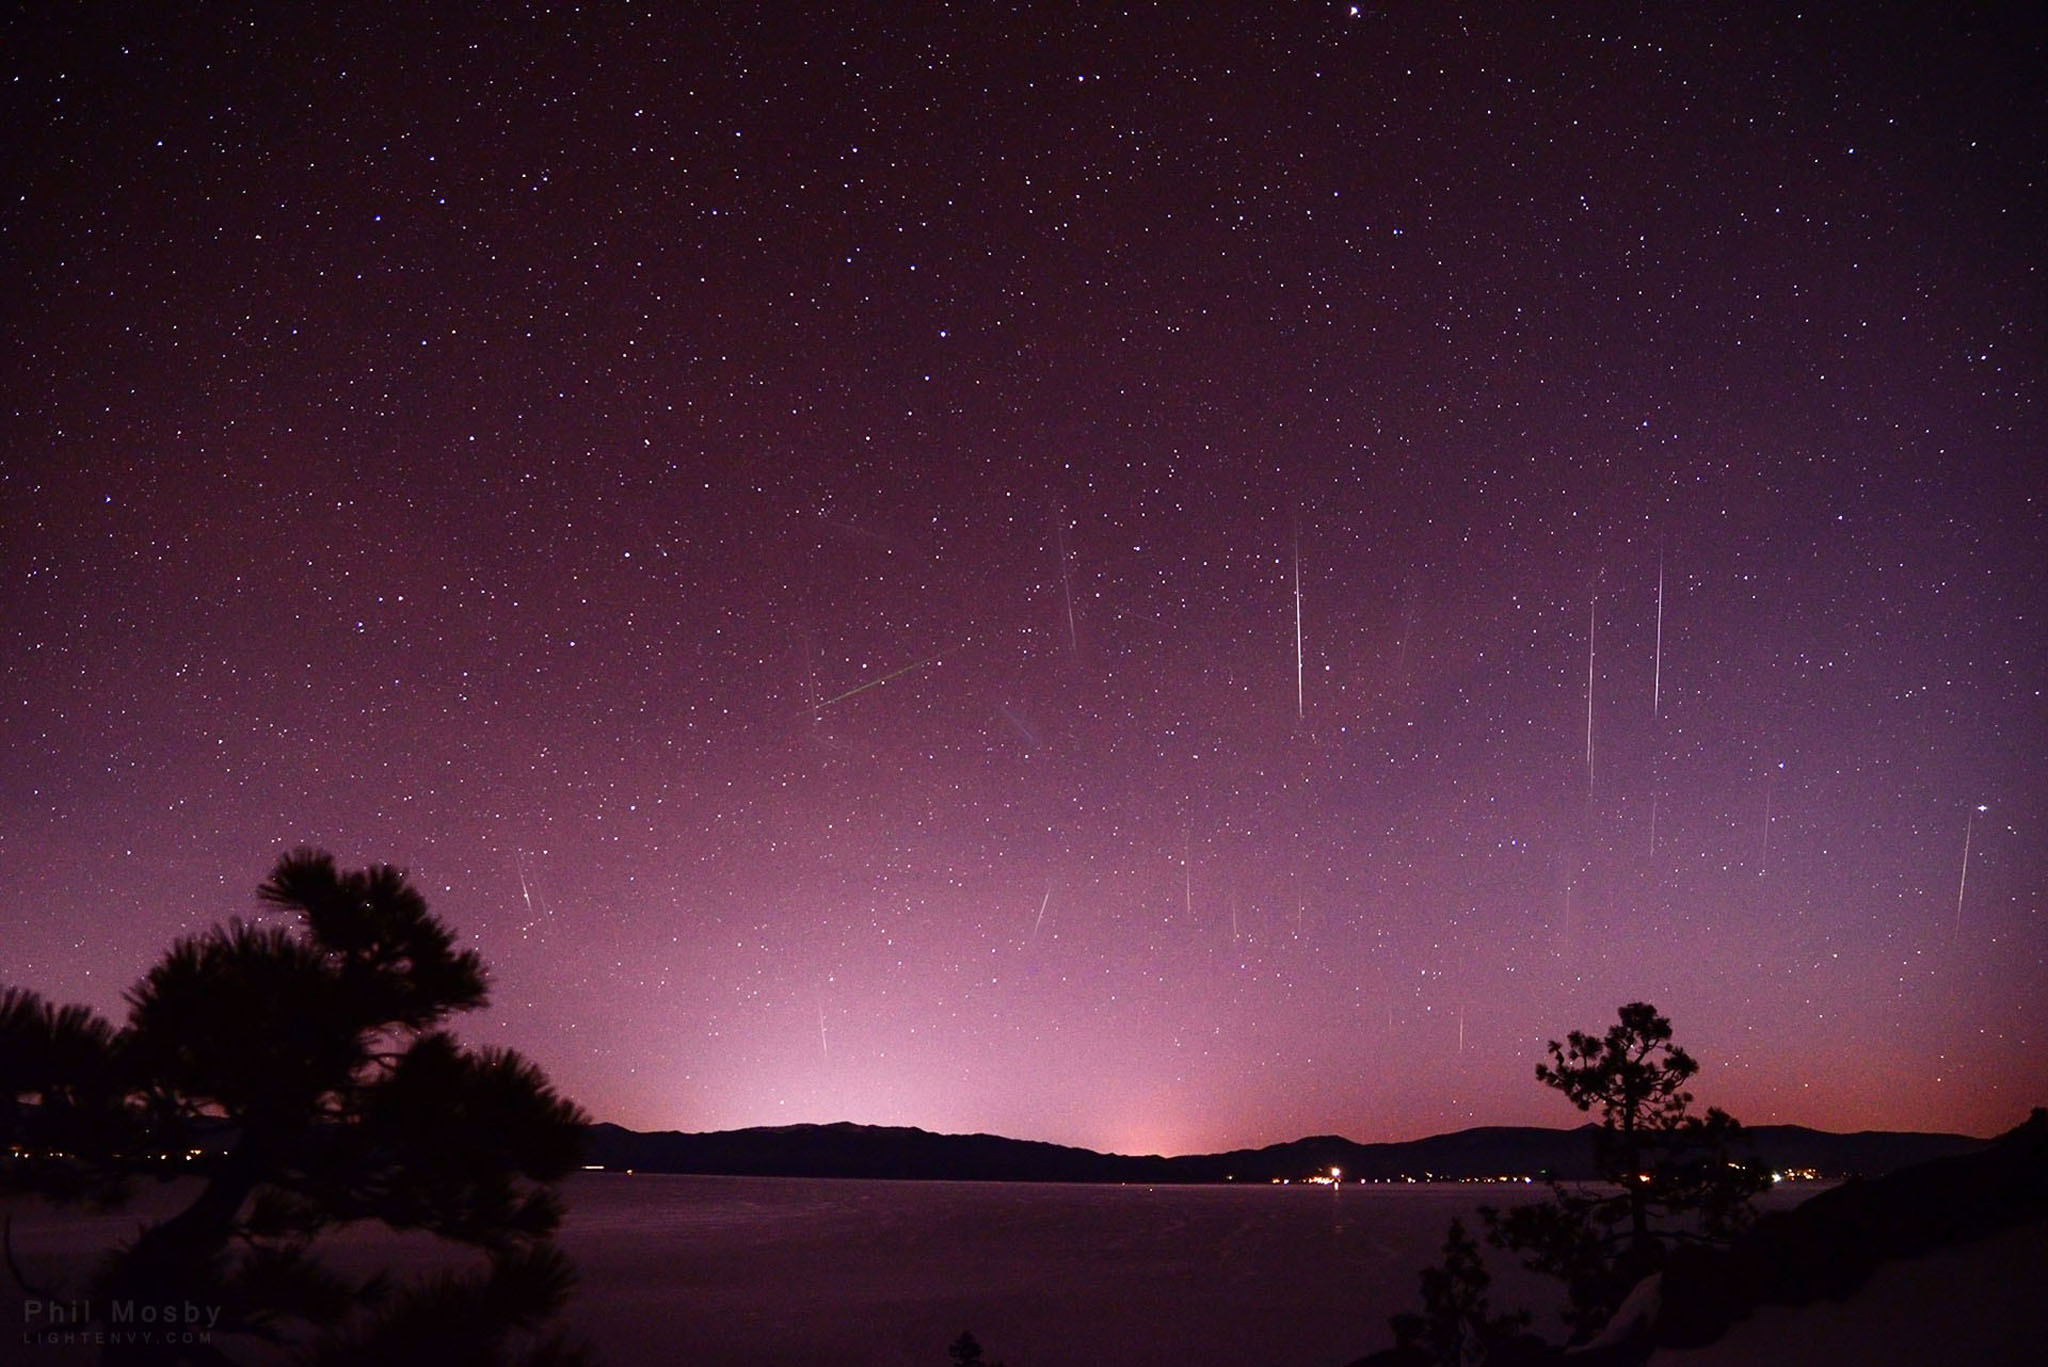 The Geminid Meteor Shower, from Eag